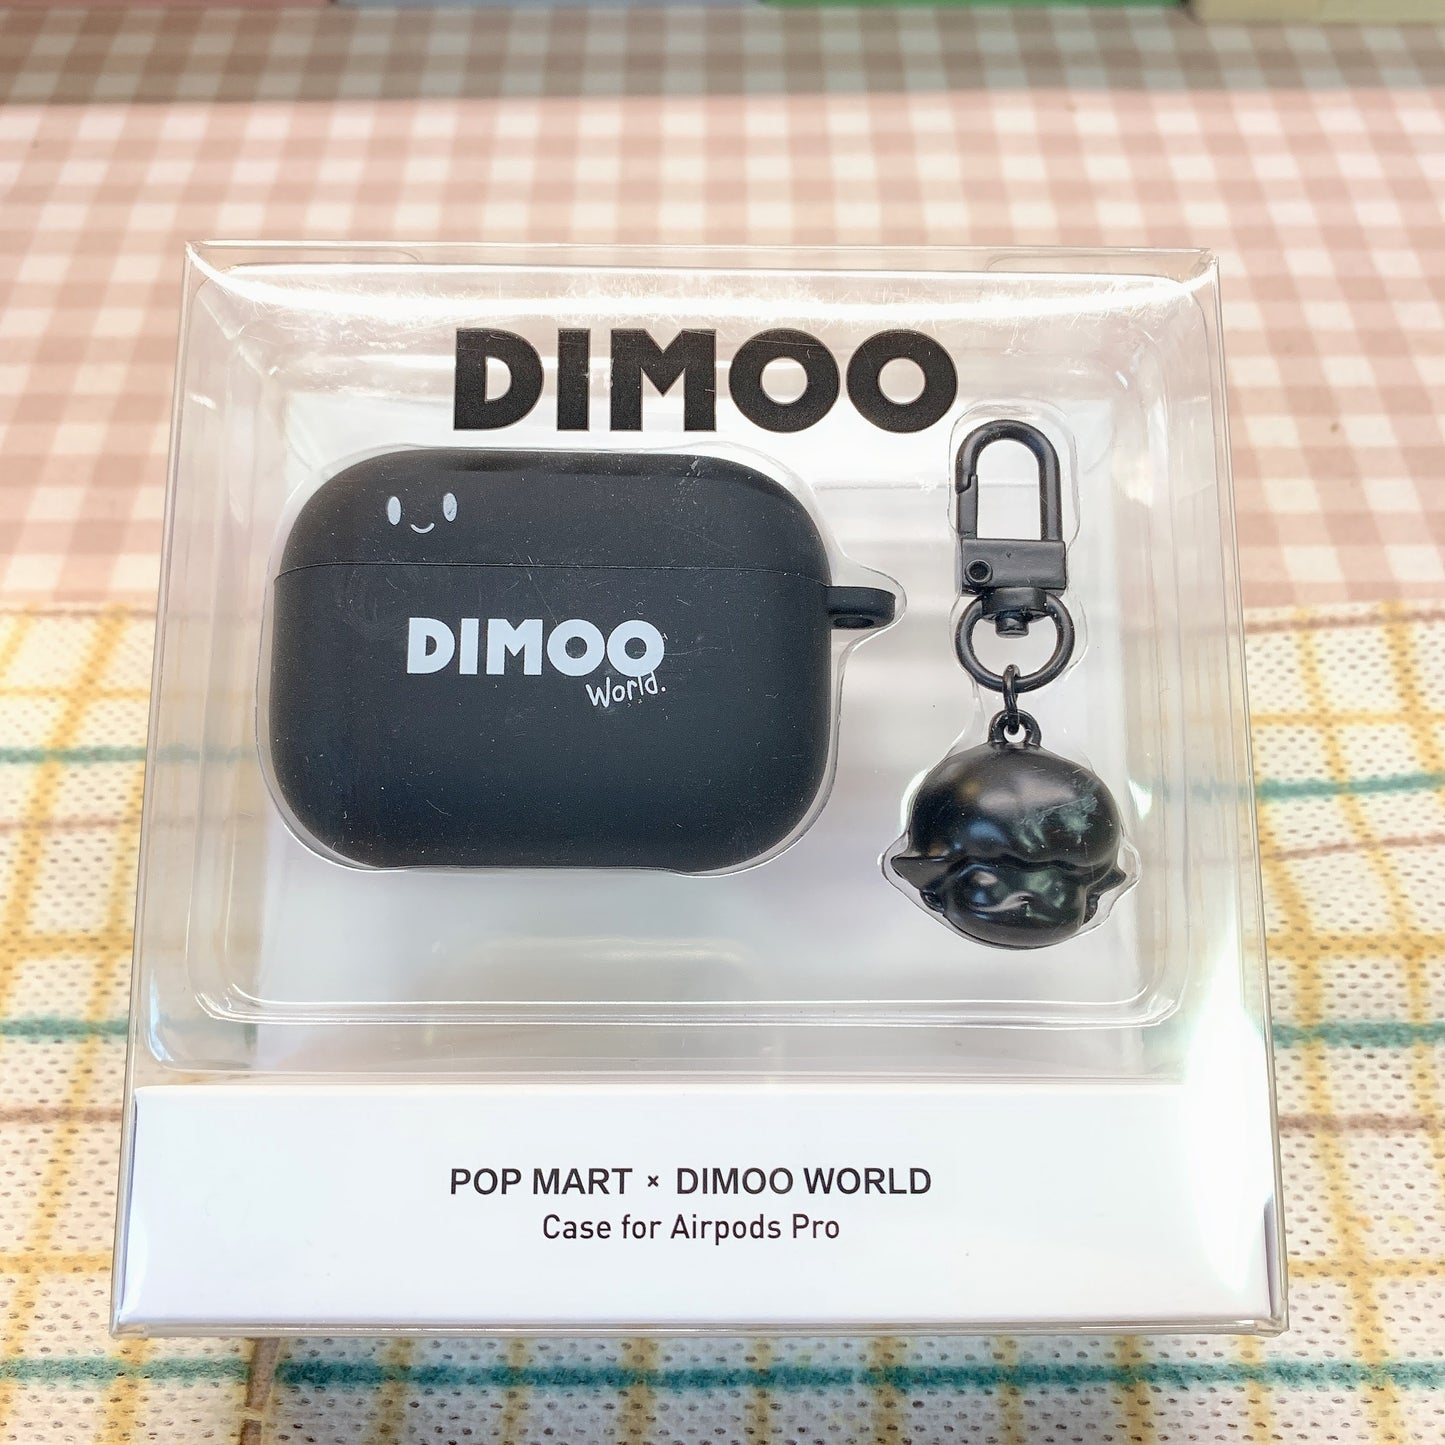 POPMART Dimoo Case for Airpods Pro（black）